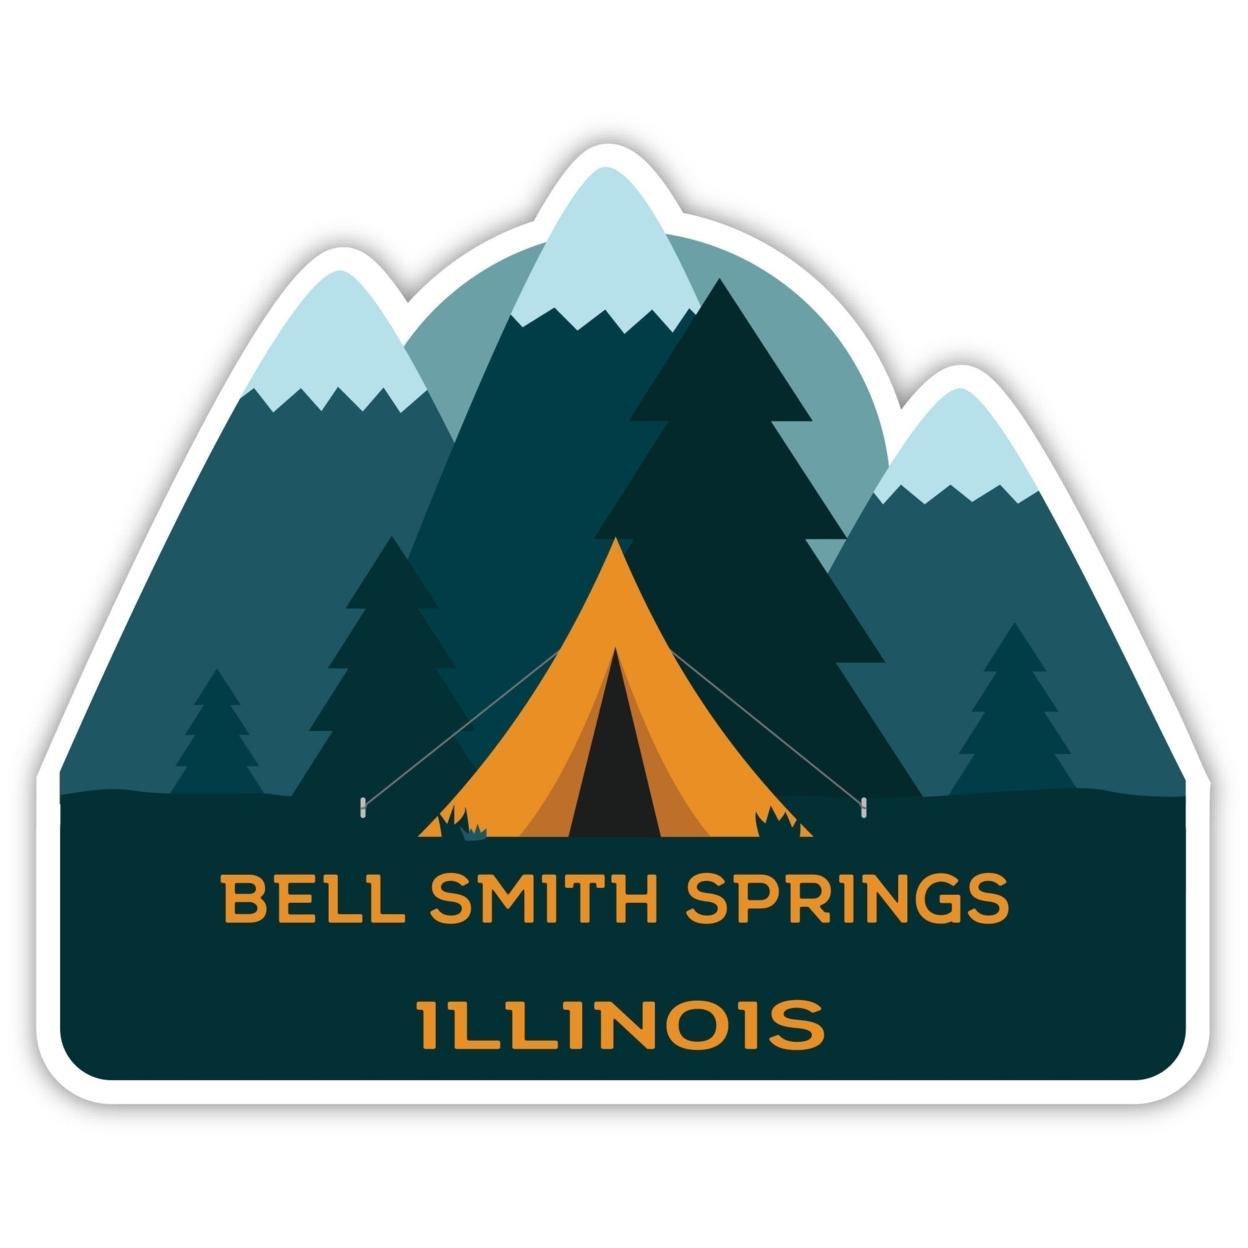 Bell Smith Springs Illinois Souvenir Decorative Stickers (Choose Theme And Size) - Single Unit, 10-Inch, Bear